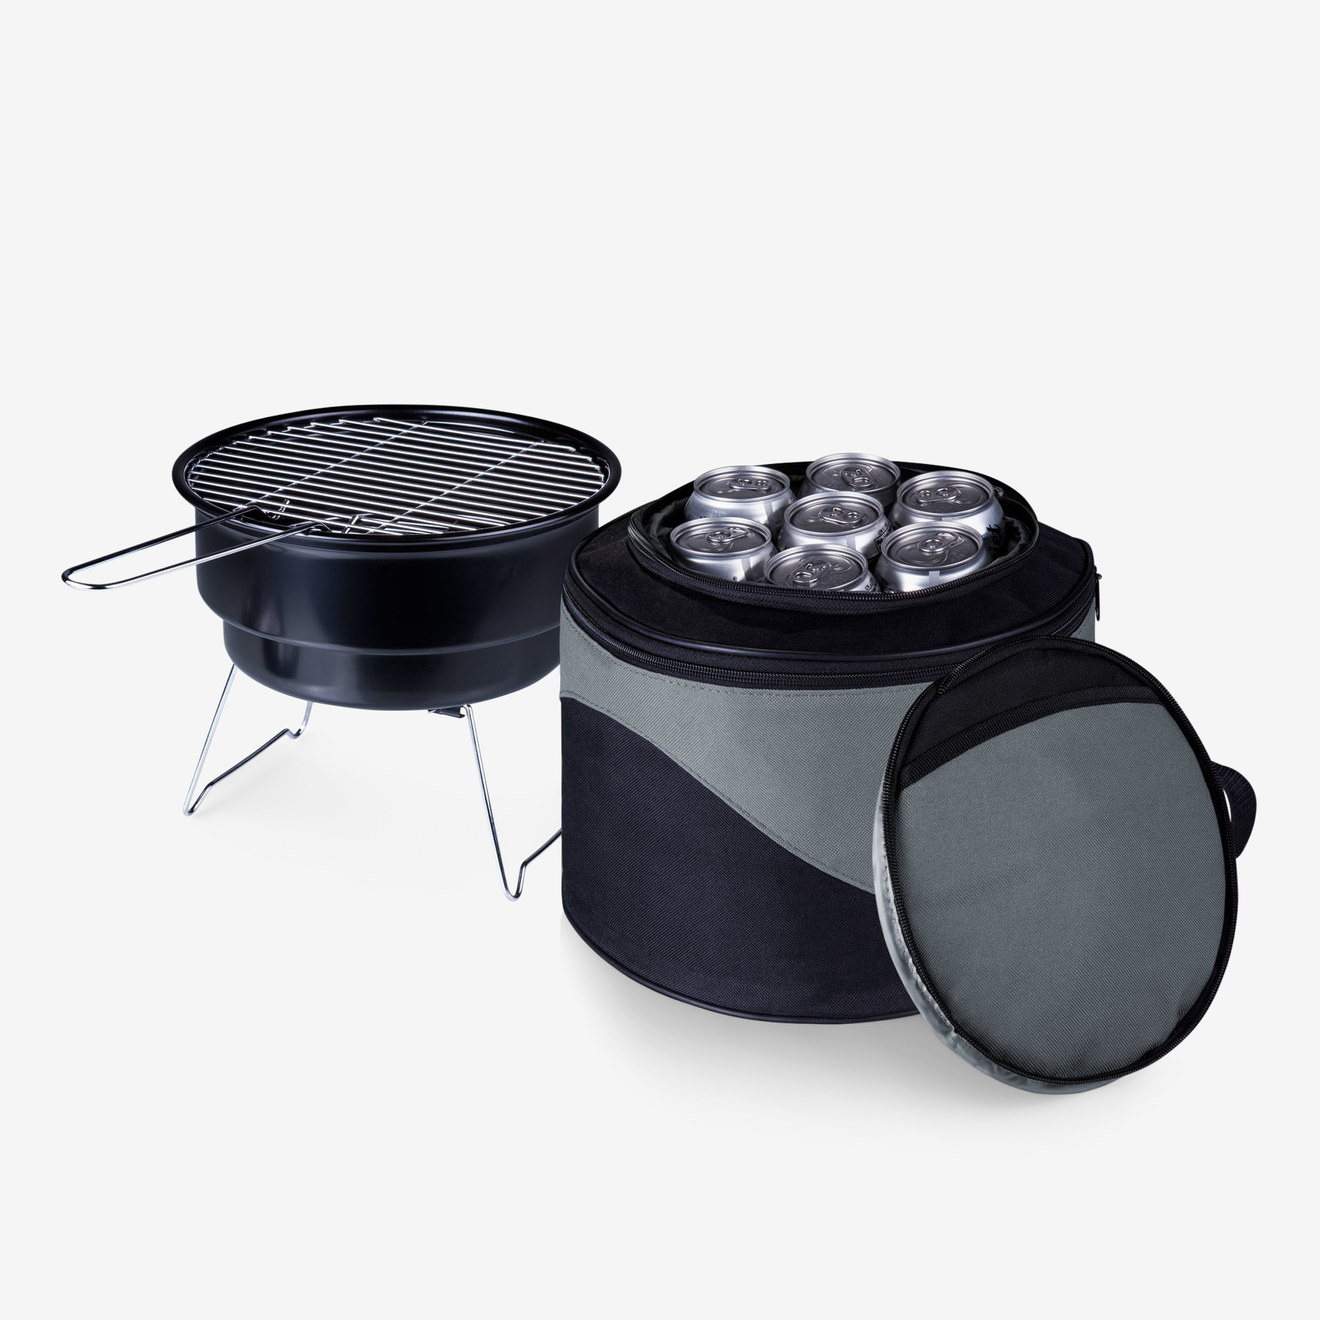 the charcoal grill and cooler cover